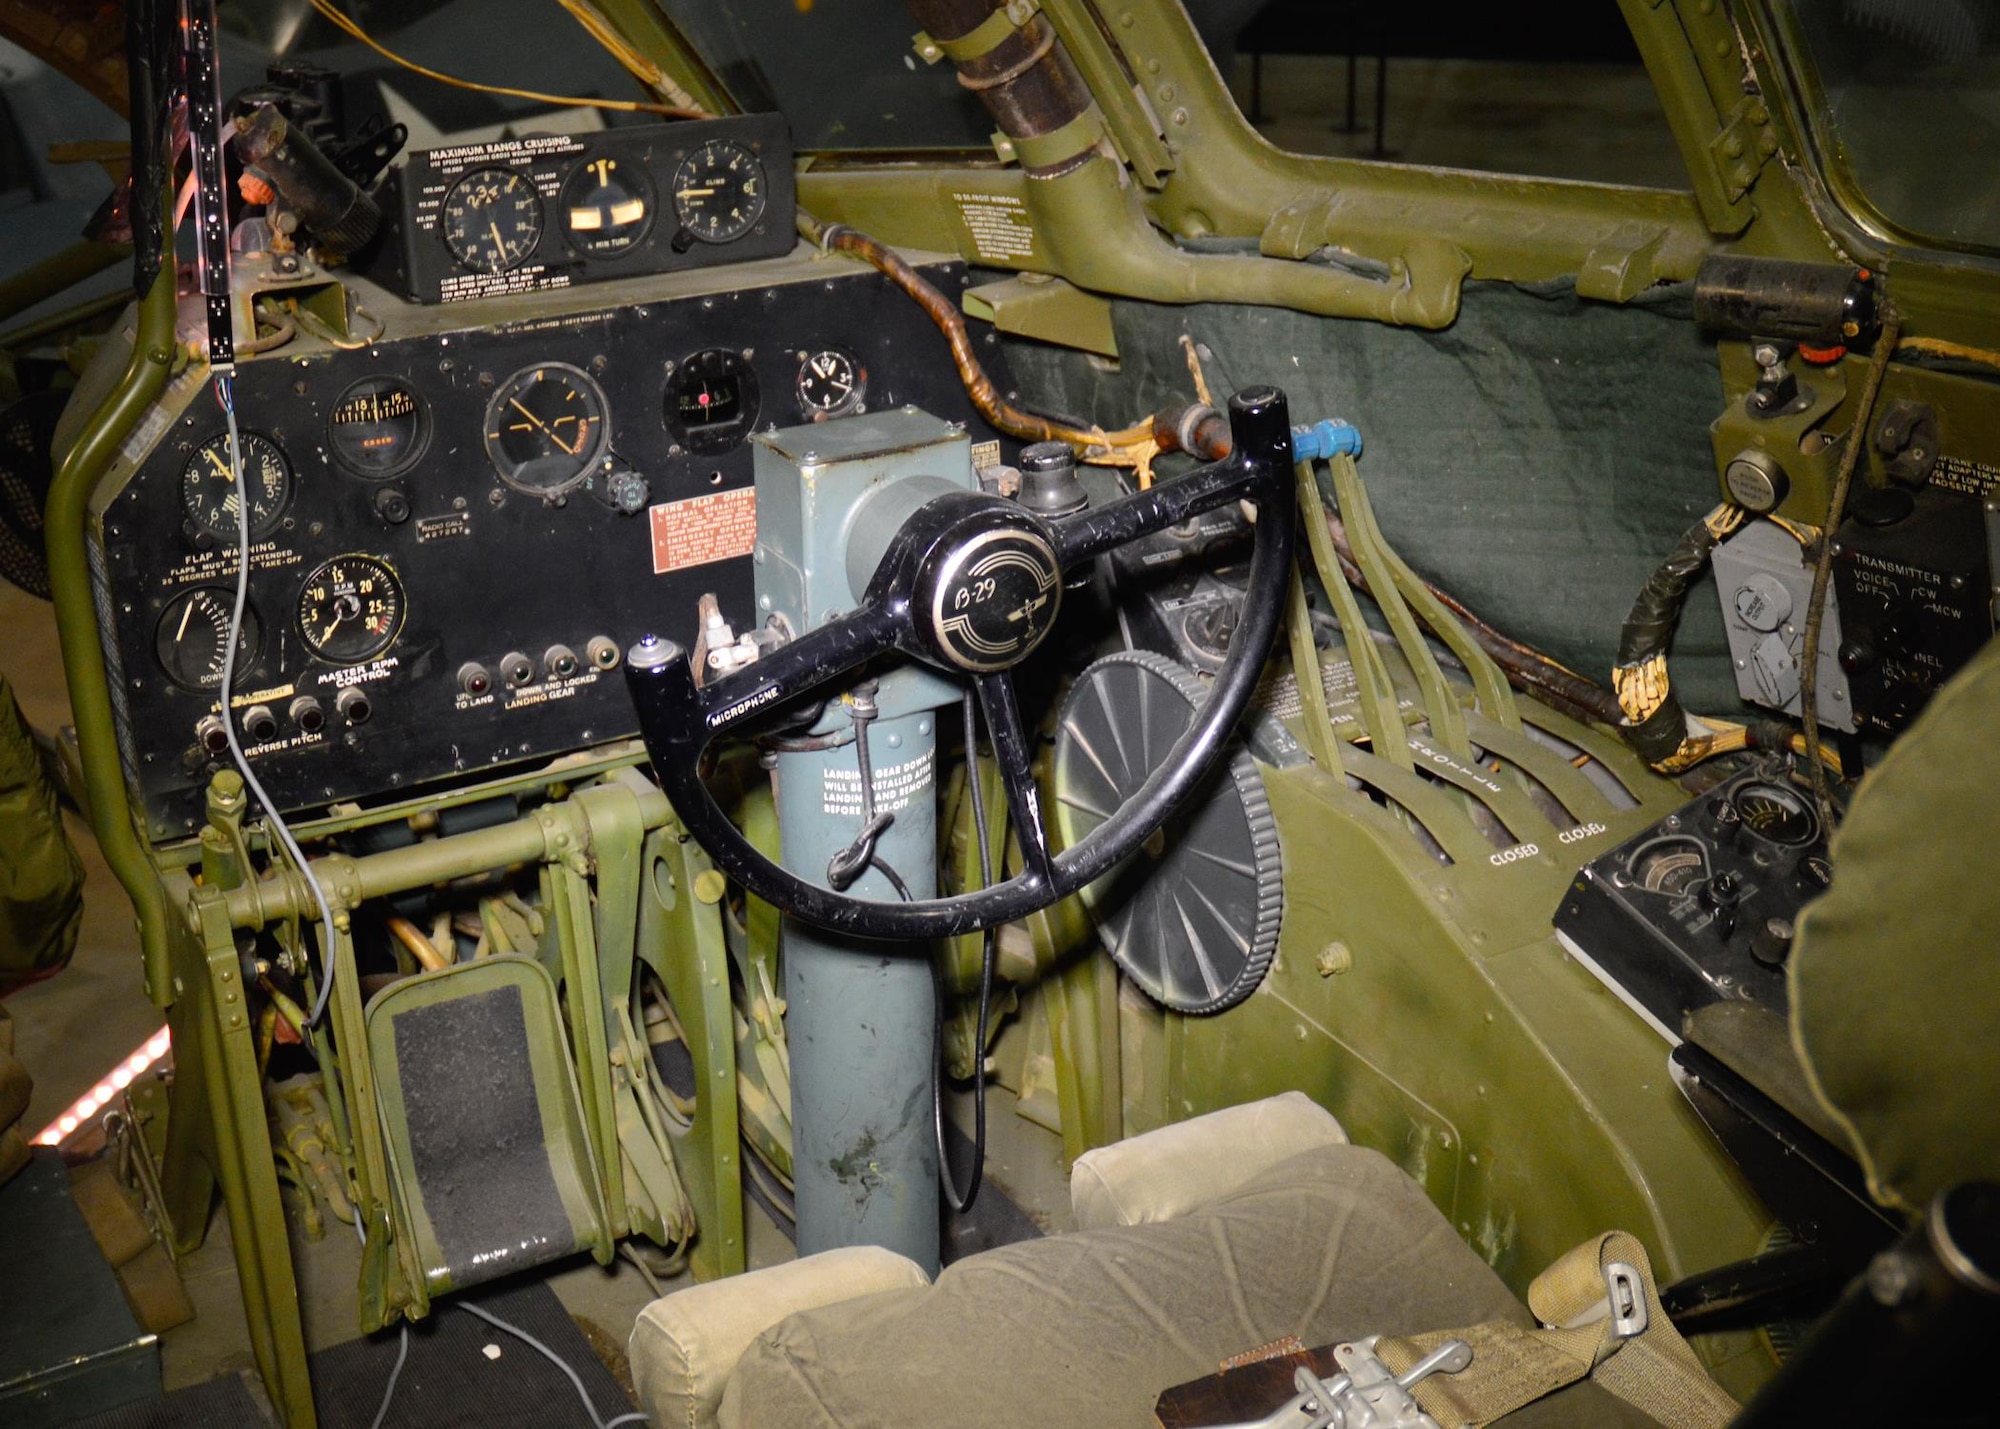 DAYTON, Ohio - Boeing B-29 Superfortress "Bockscar" interior view of the copilot position in the WWII Gallery at the National Museum of the U.S. Air Force. (U.S. Air Force photo)